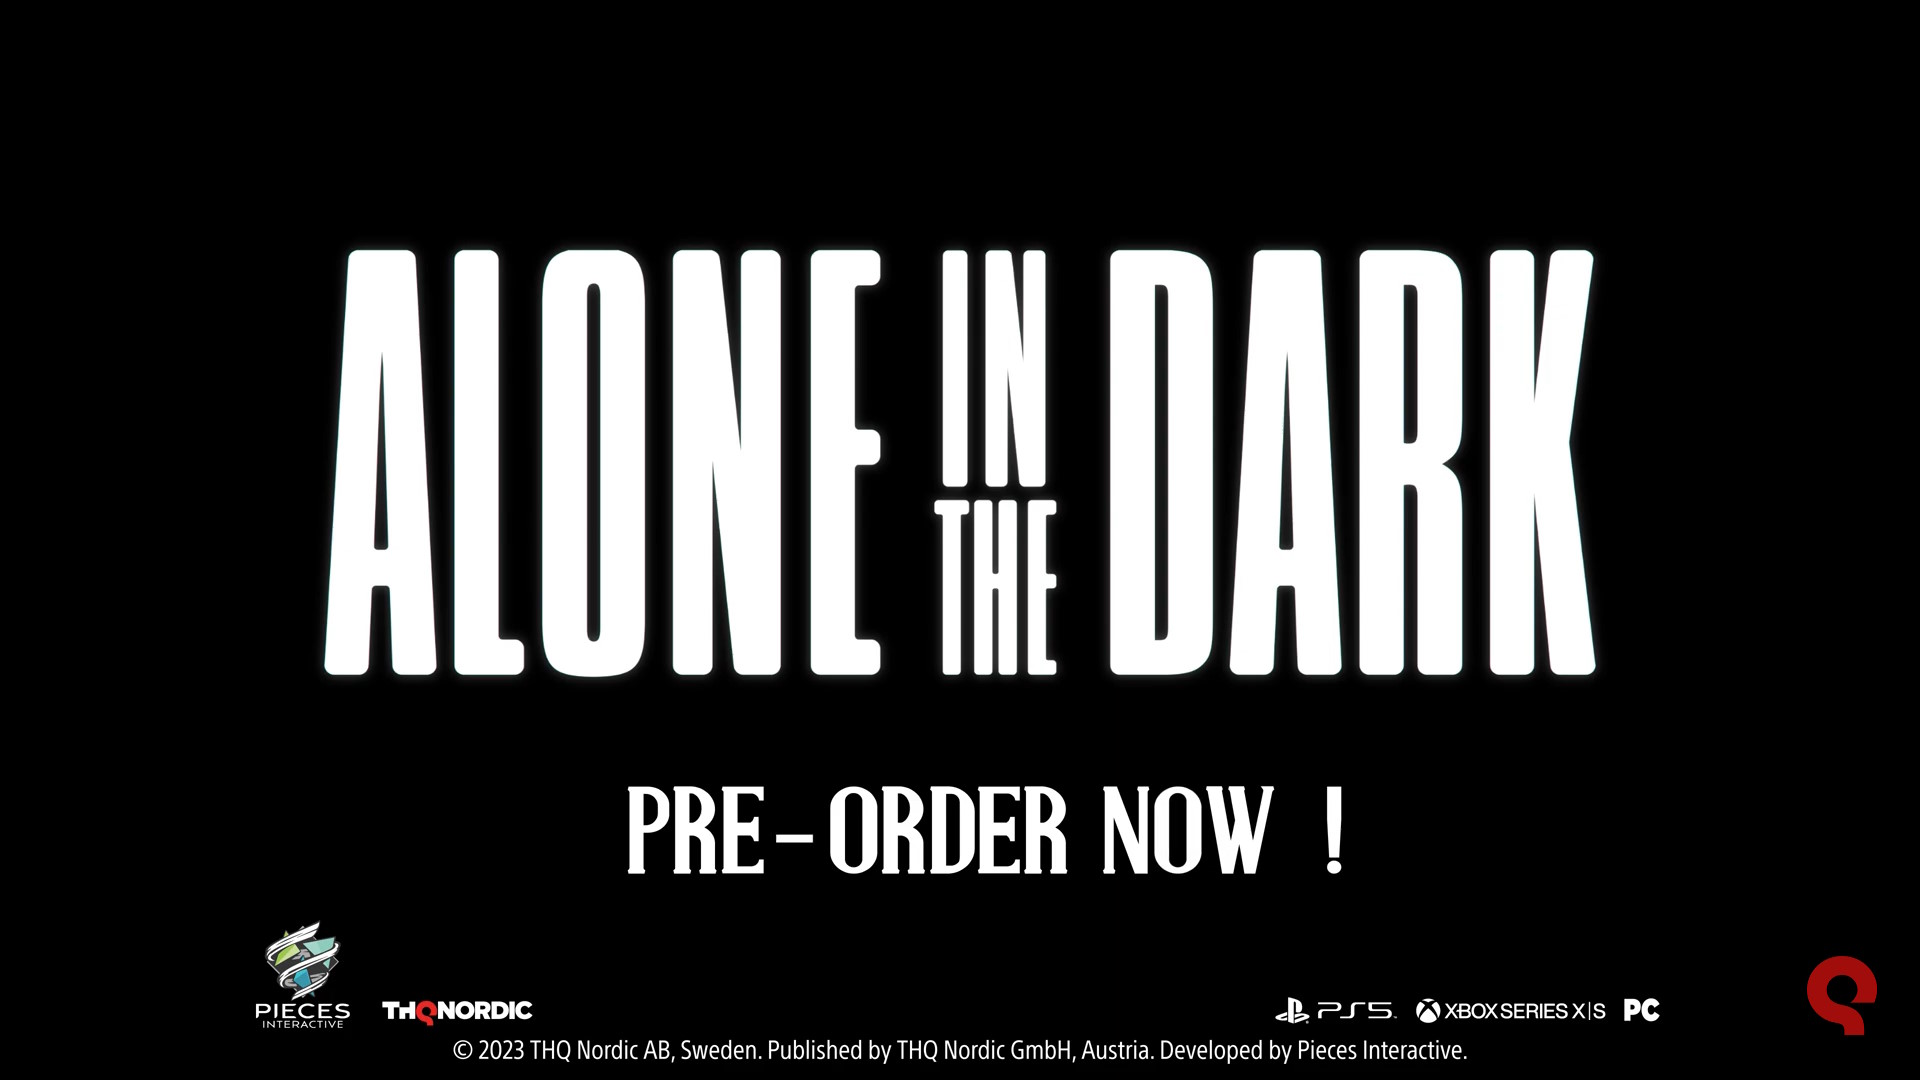 New Alone In The Dark Teaser Trailer Released - BunnyGaming.com